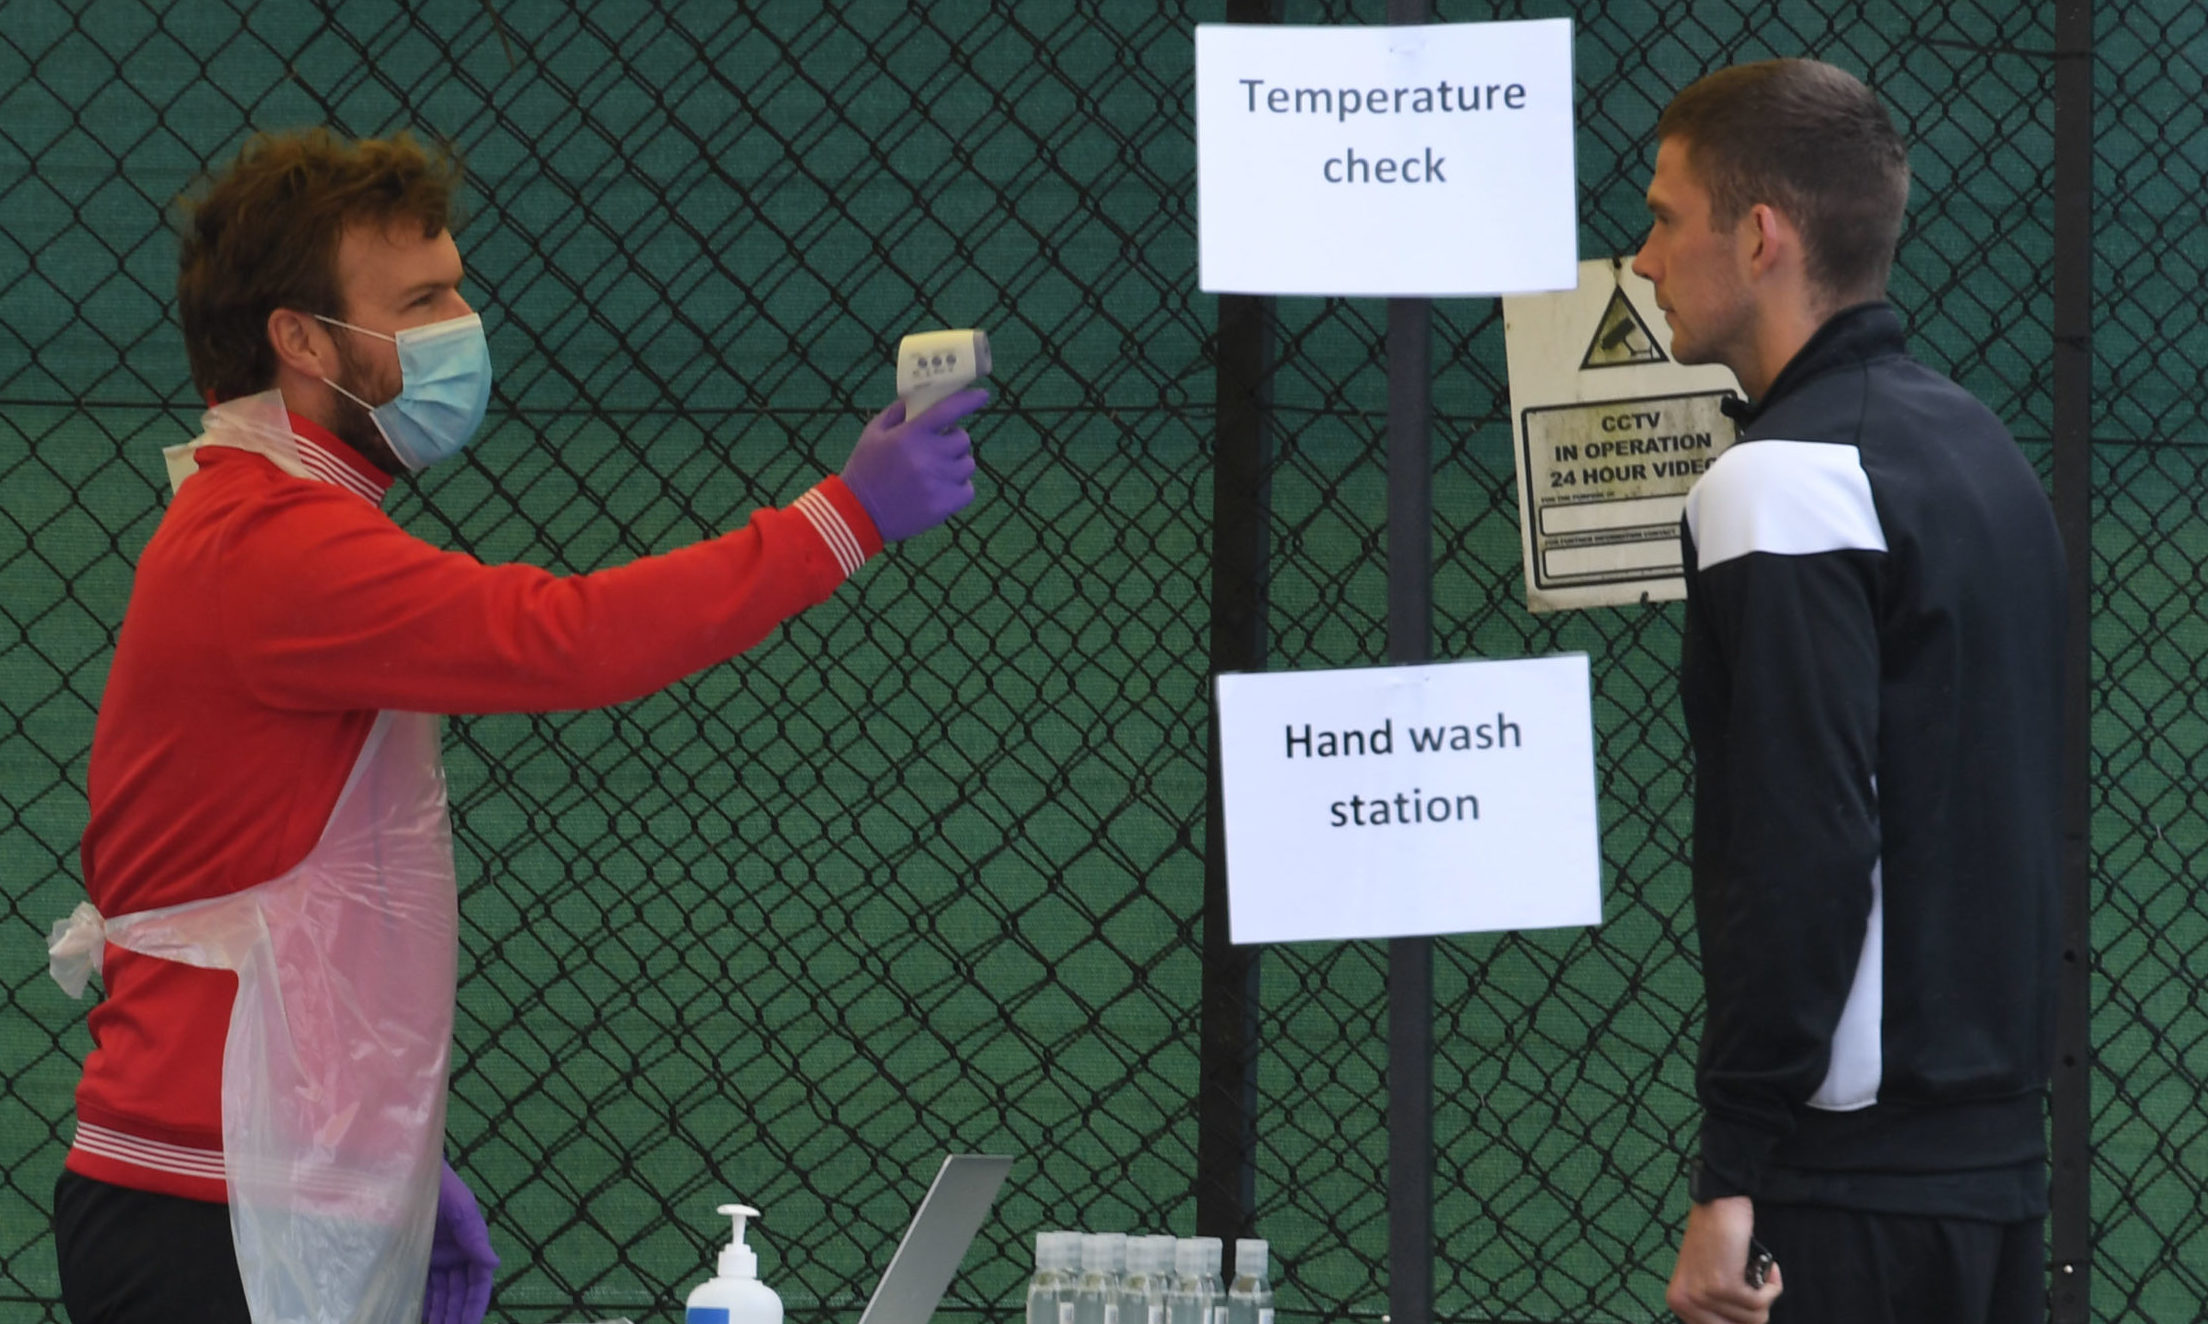 St Mirren’s Jack Baird has his temperature checked at training